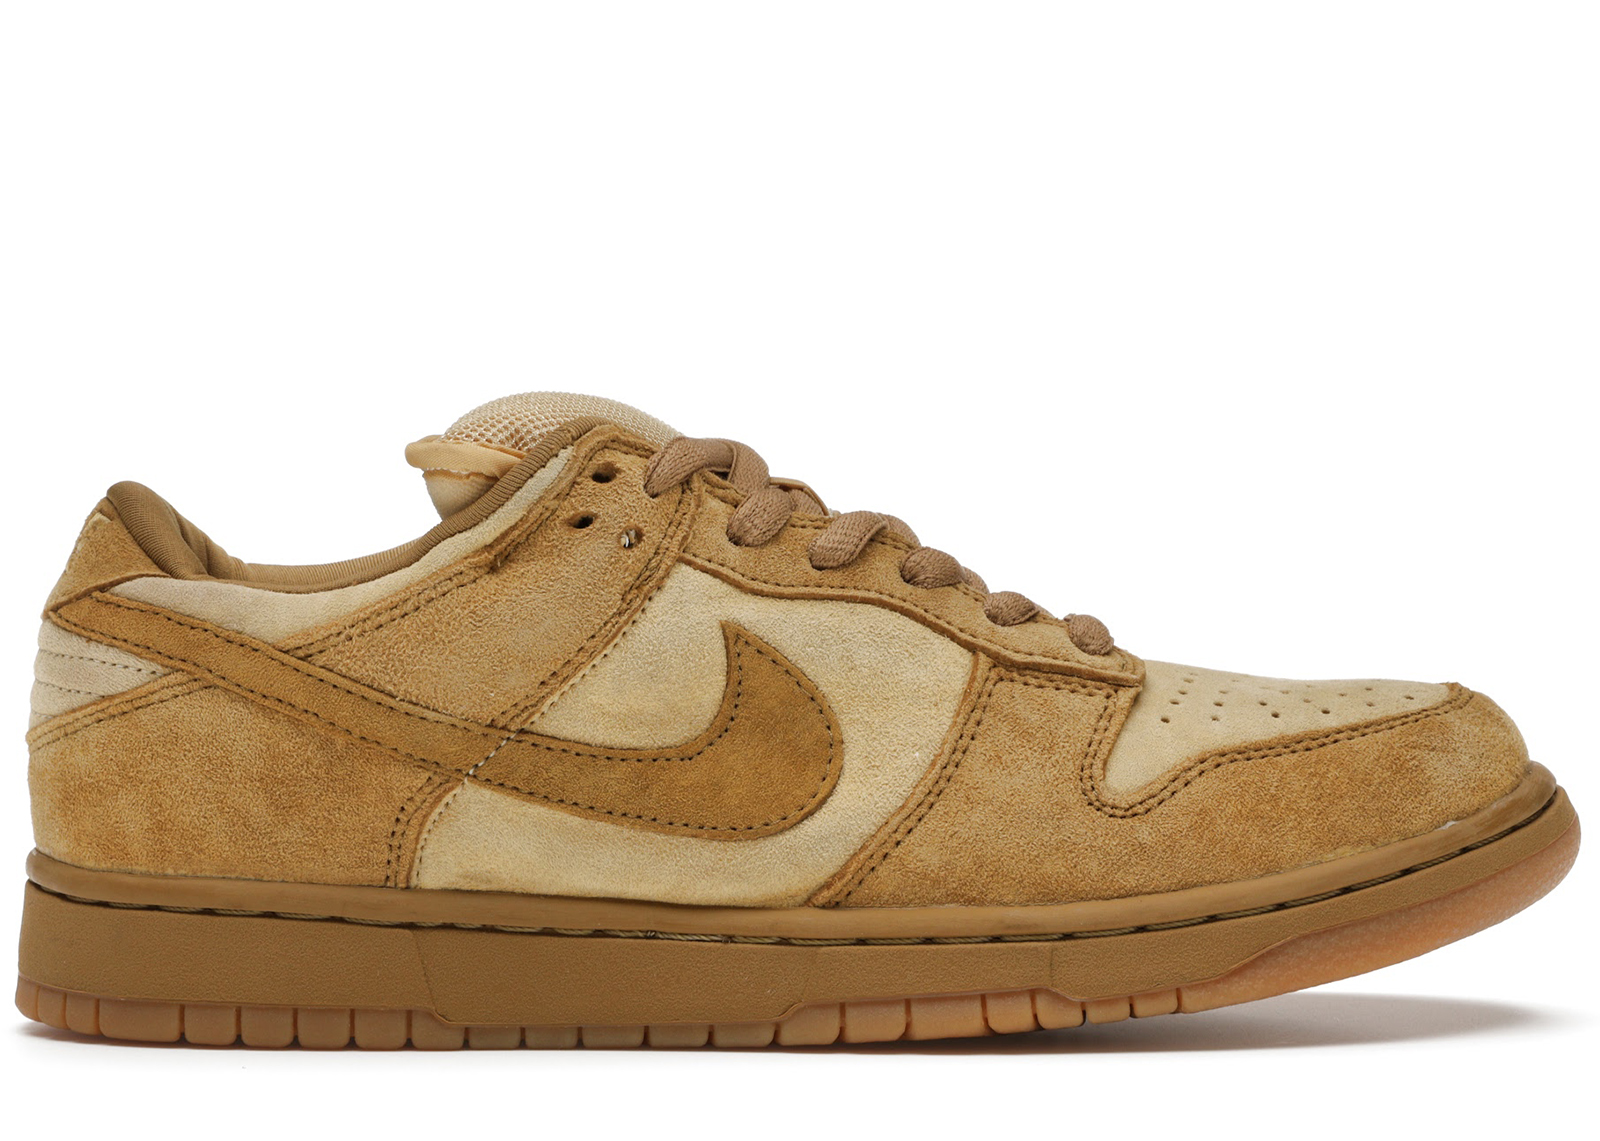 Nike SB Dunk Low Reese Forbes Wheat